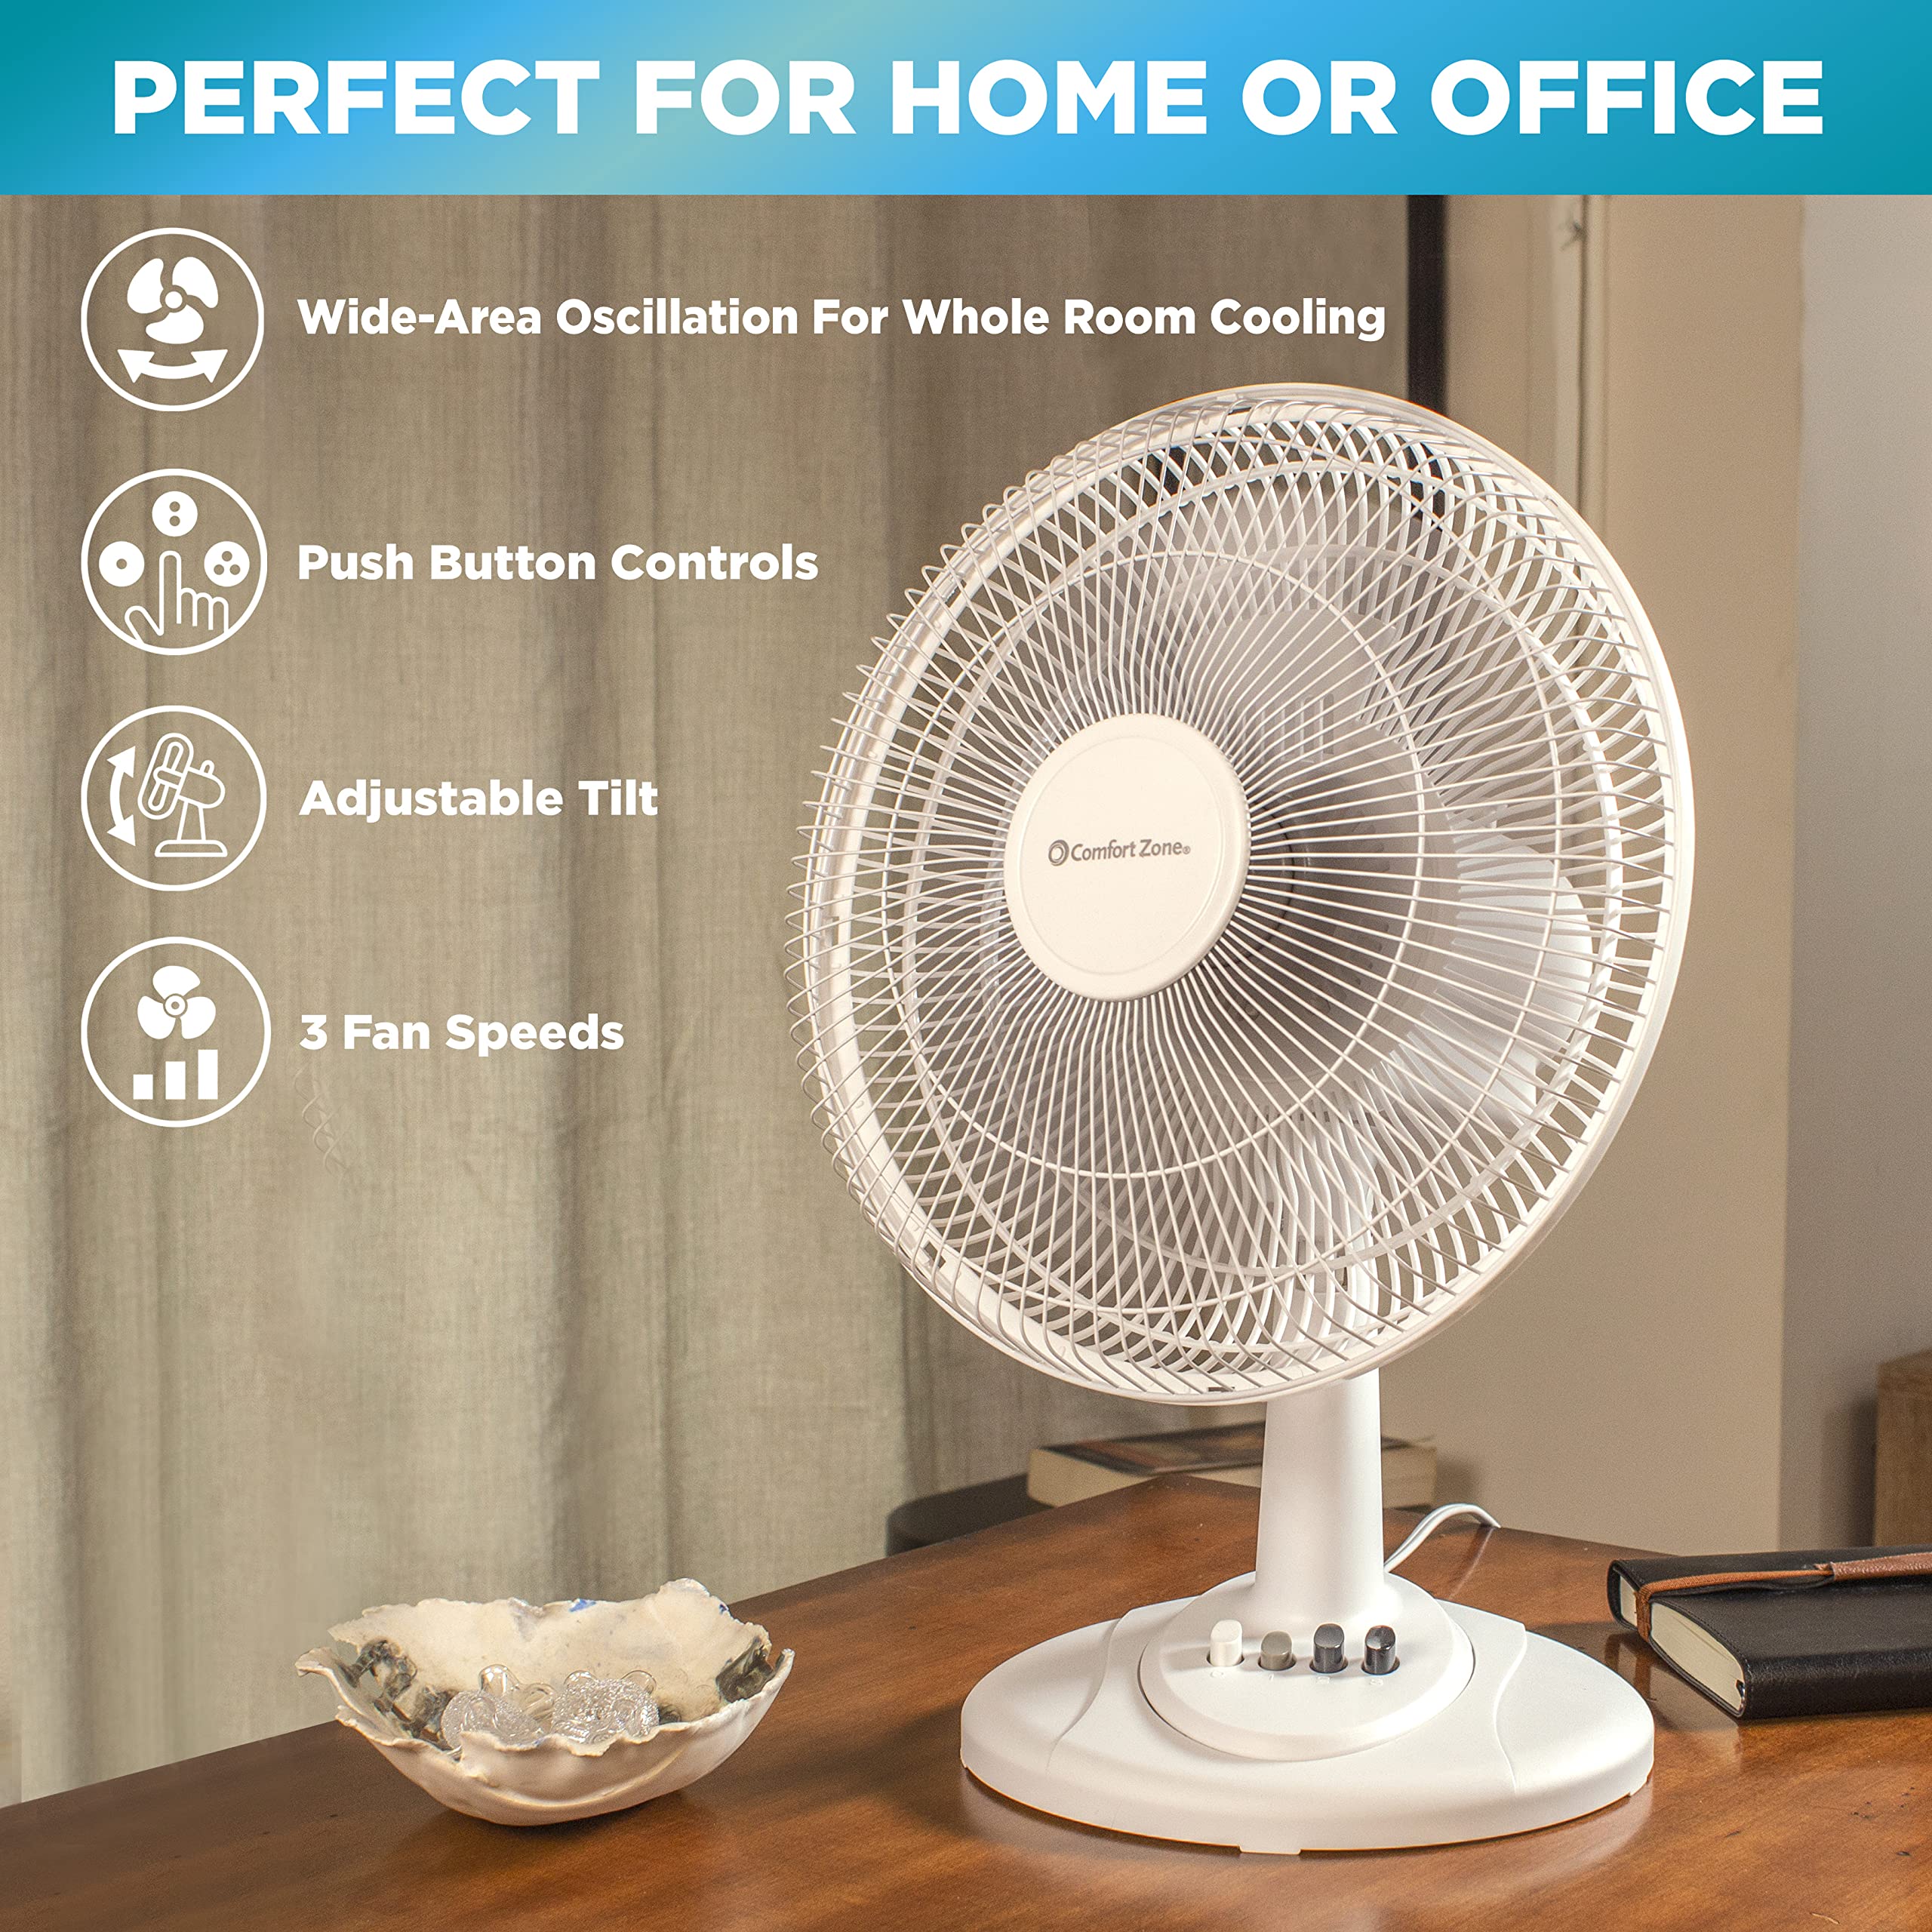 Comfort Zone CZ121WT 12” 3-Speed Oscillating Table Fan with Adjustable Tilt, Convenient Push Button Controls, Quiet Operation, White